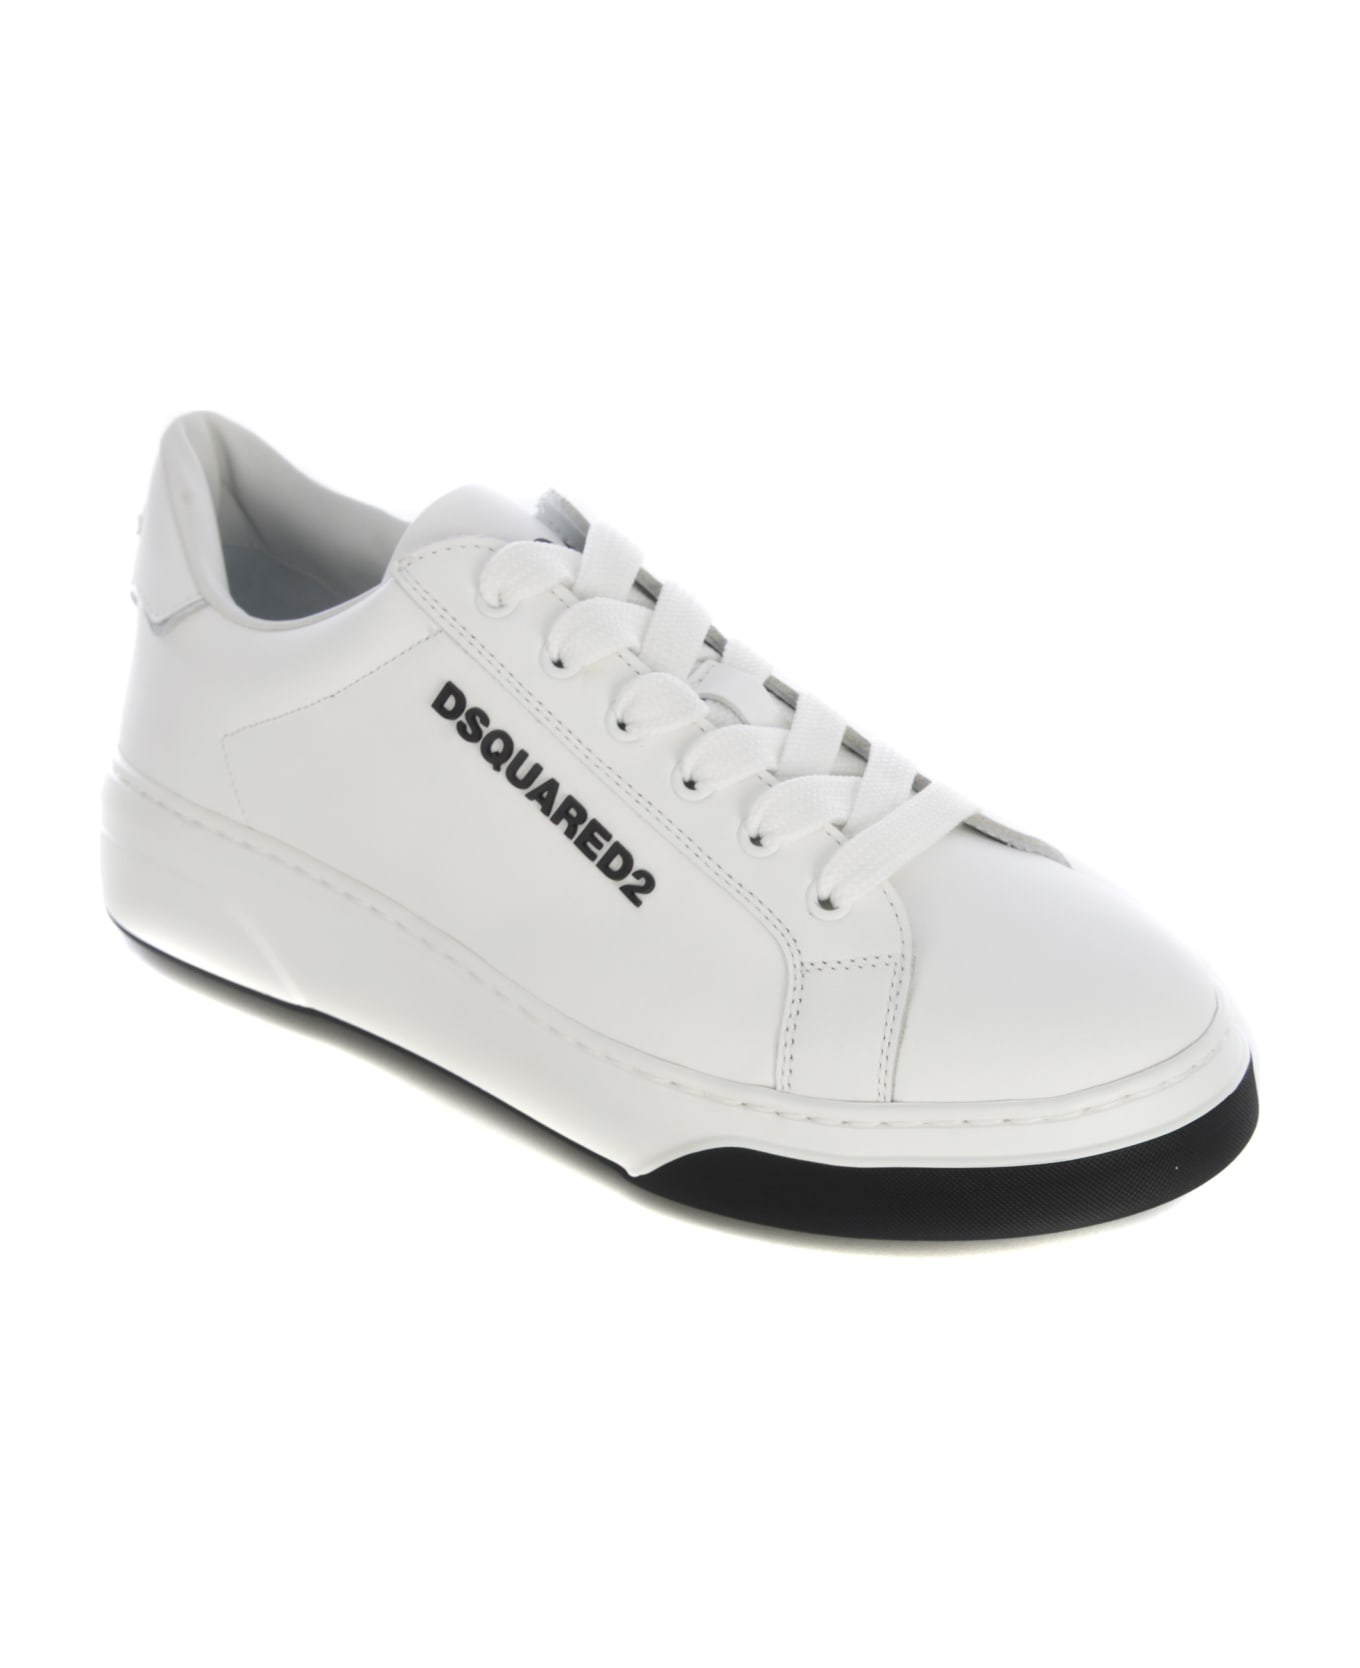 Dsquared2 Sneakers "1964" - Bianco